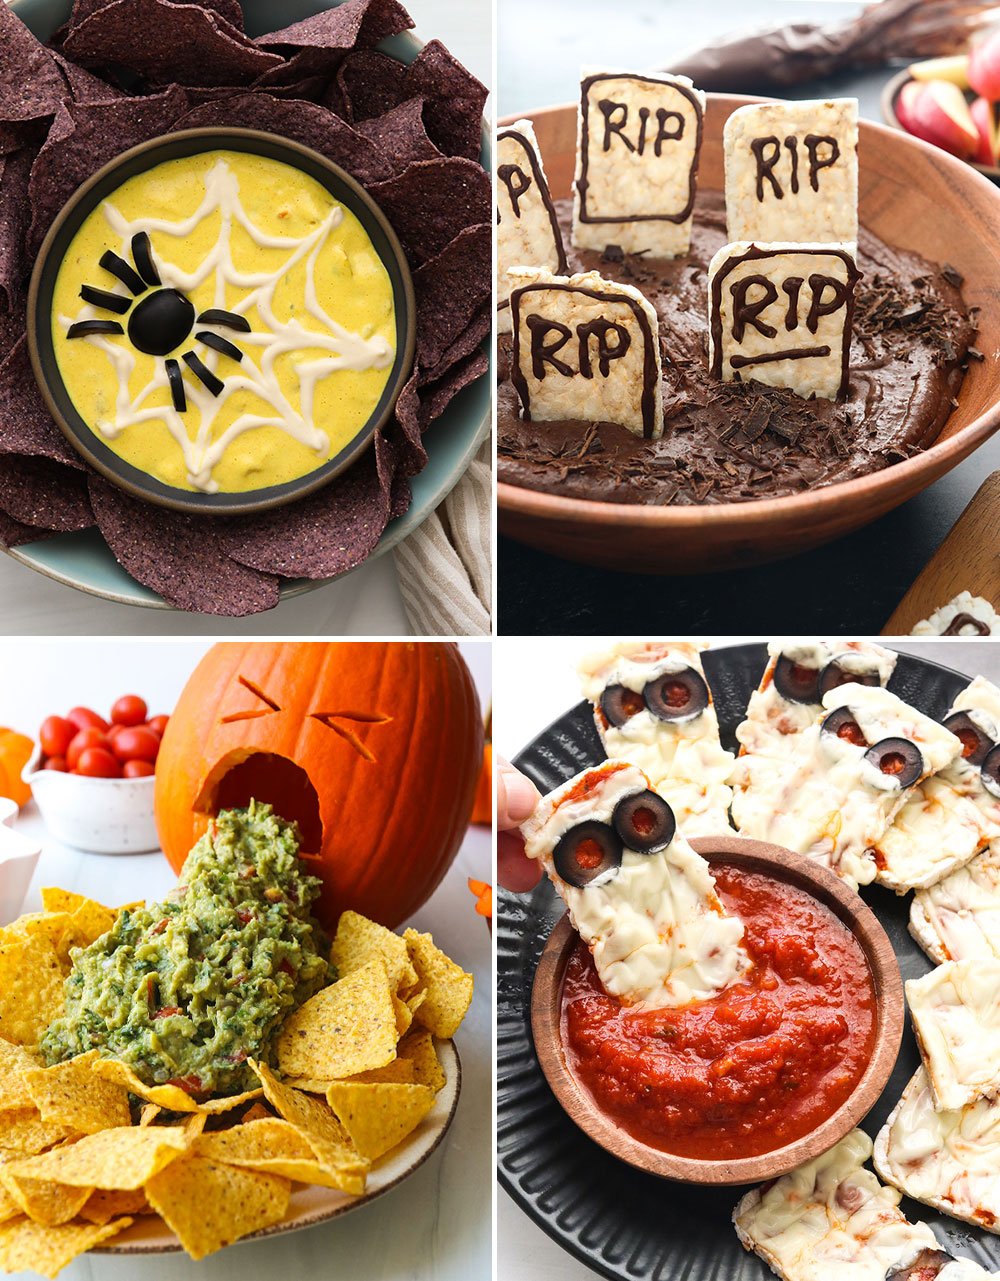 Halloween dip ideas including a spiderweb on queso and tombstones in a dark dip.